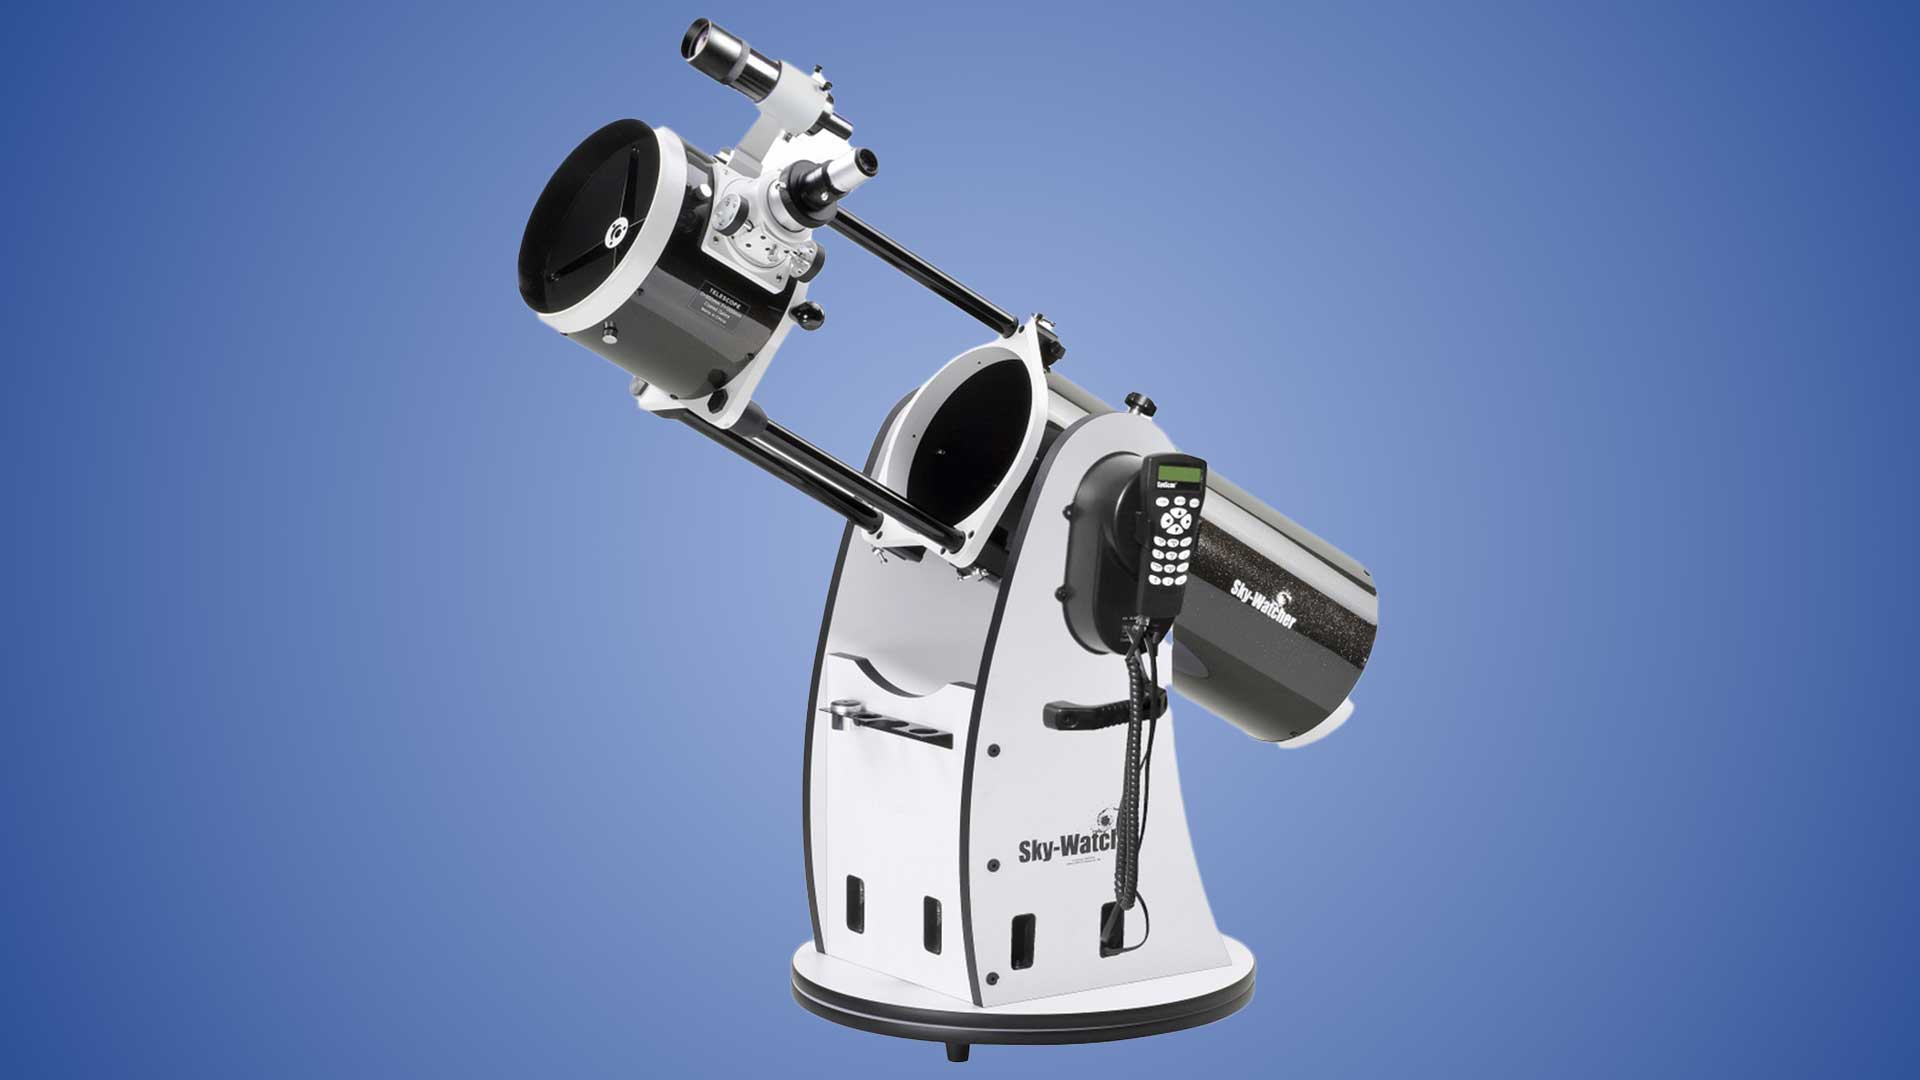 Is a motorized telescope worth the cost? Space image